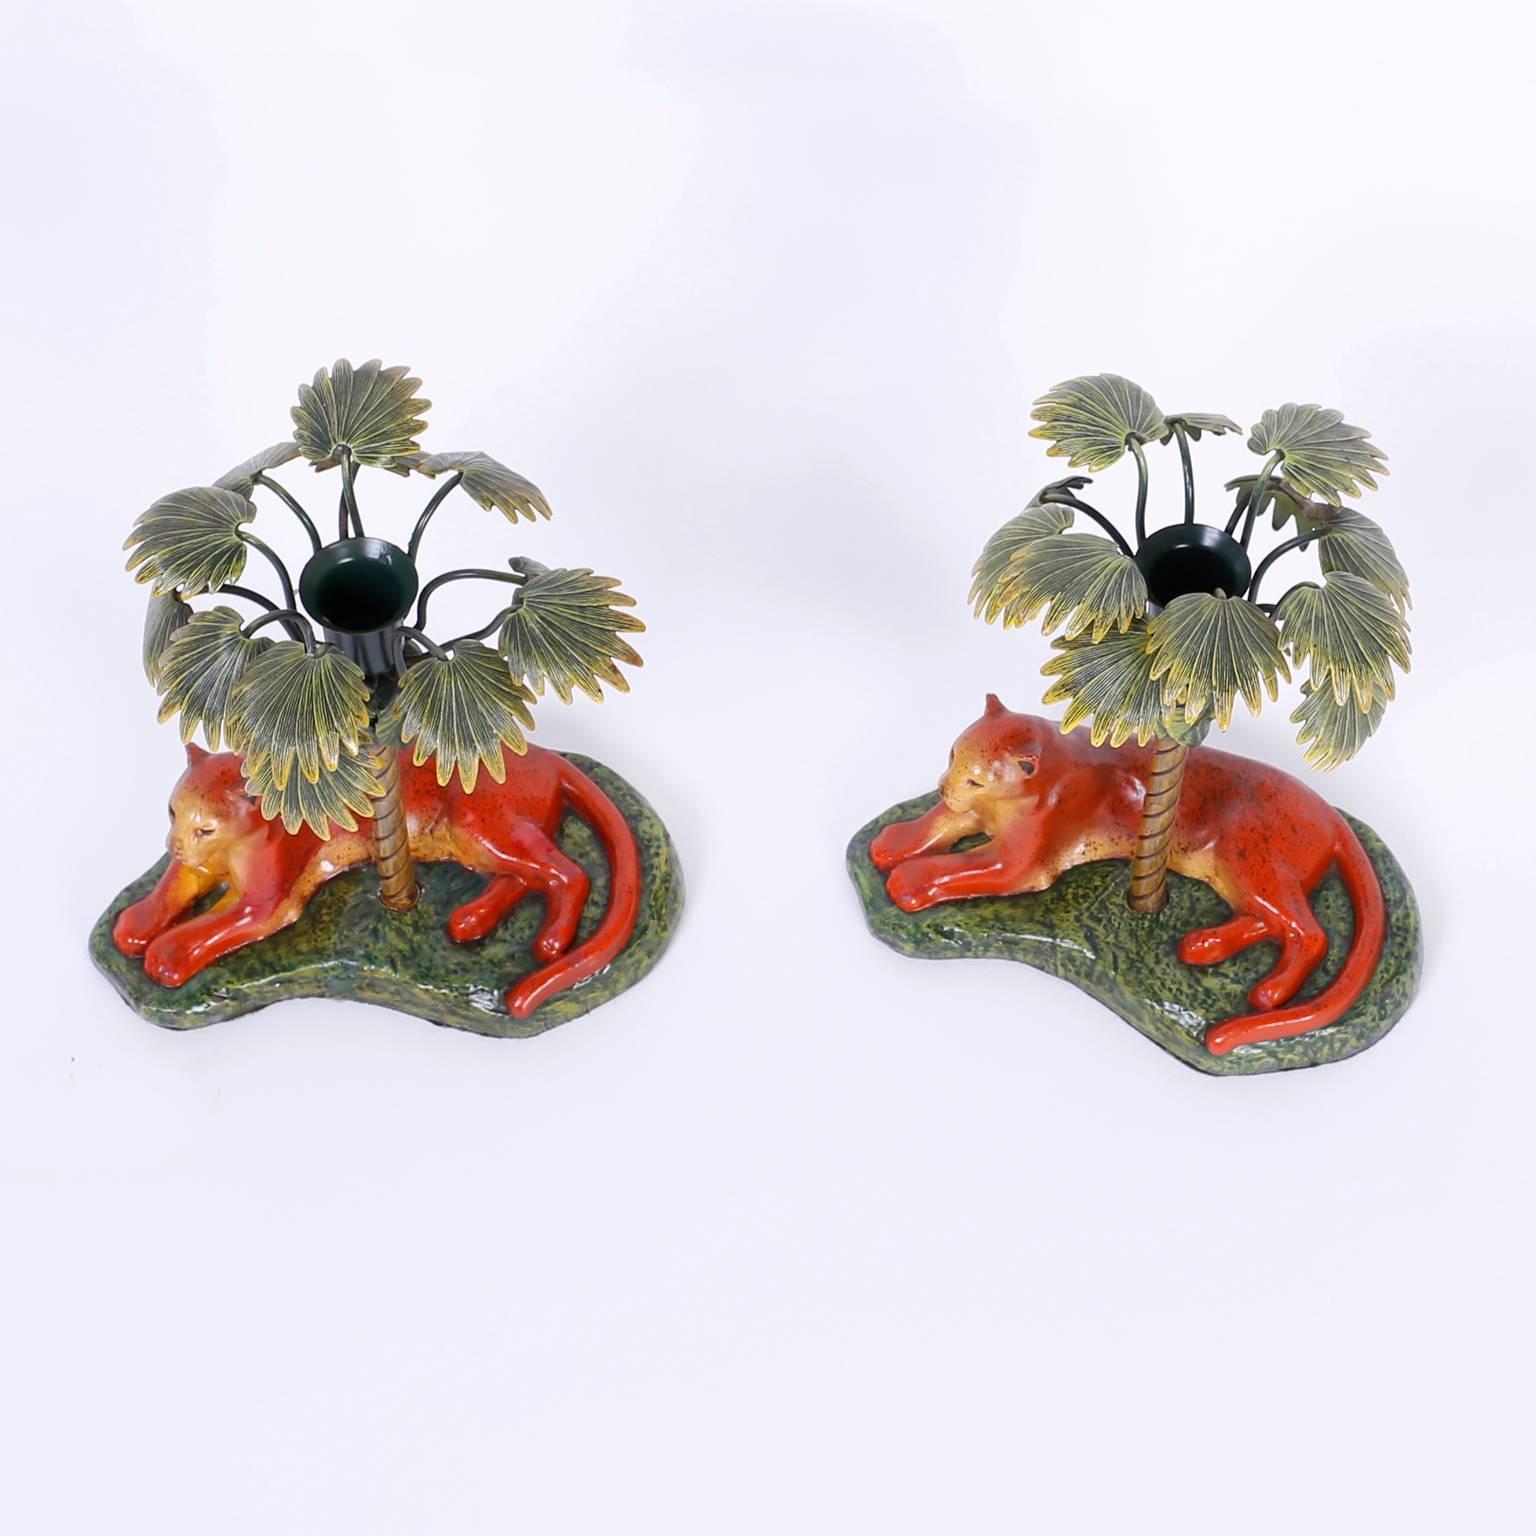 Alluring pair of painted metal candlesticks depicting a big cat in repose relaxing under a palm tree.